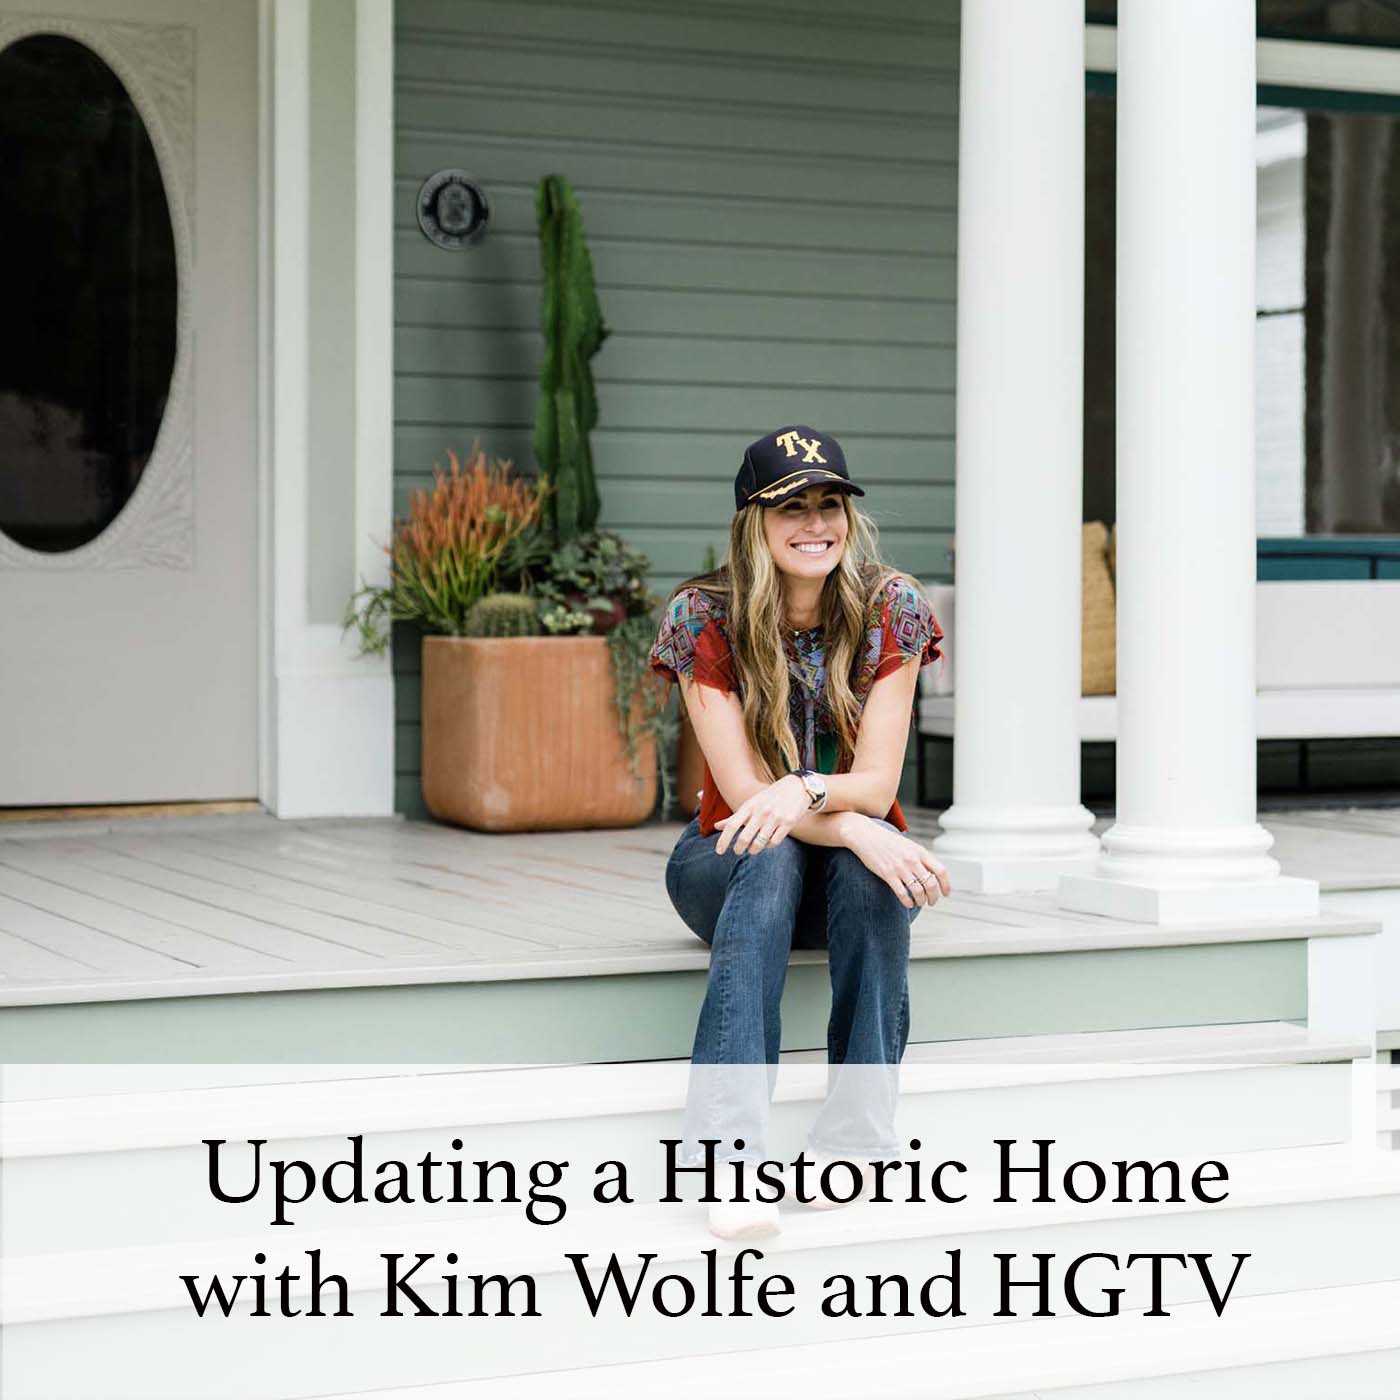 updating-a-historic-home-with-kim-wolfe-and-hgtv-in-san-antonio-tx-blog-paper-moon-painting